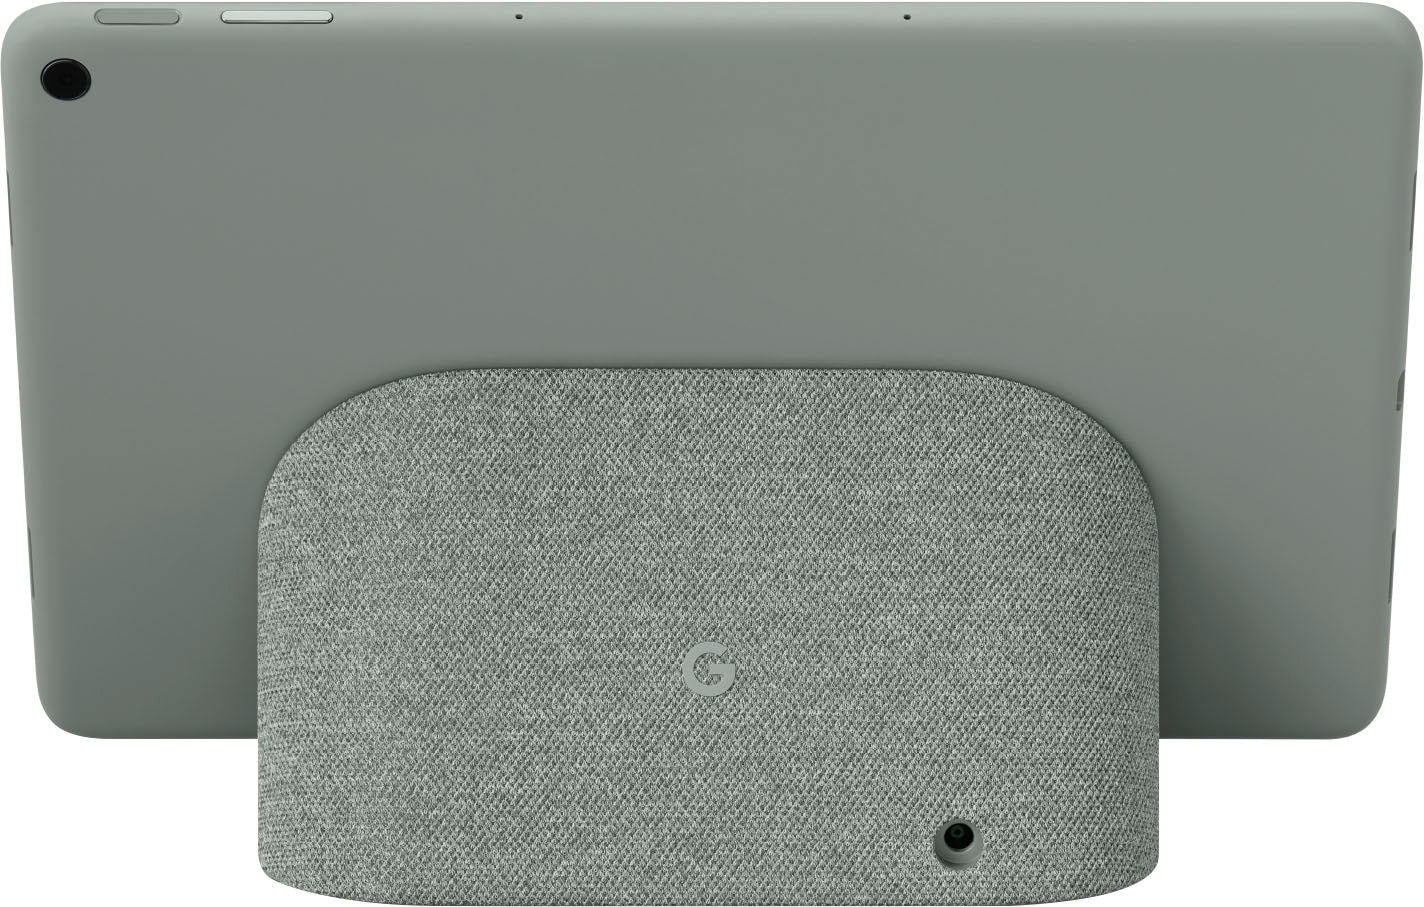 Google - Pixel Tablet with Charging Speaker Dock - 11"  Android Tablet - 128GB - Wi-Fi | BBSS14A